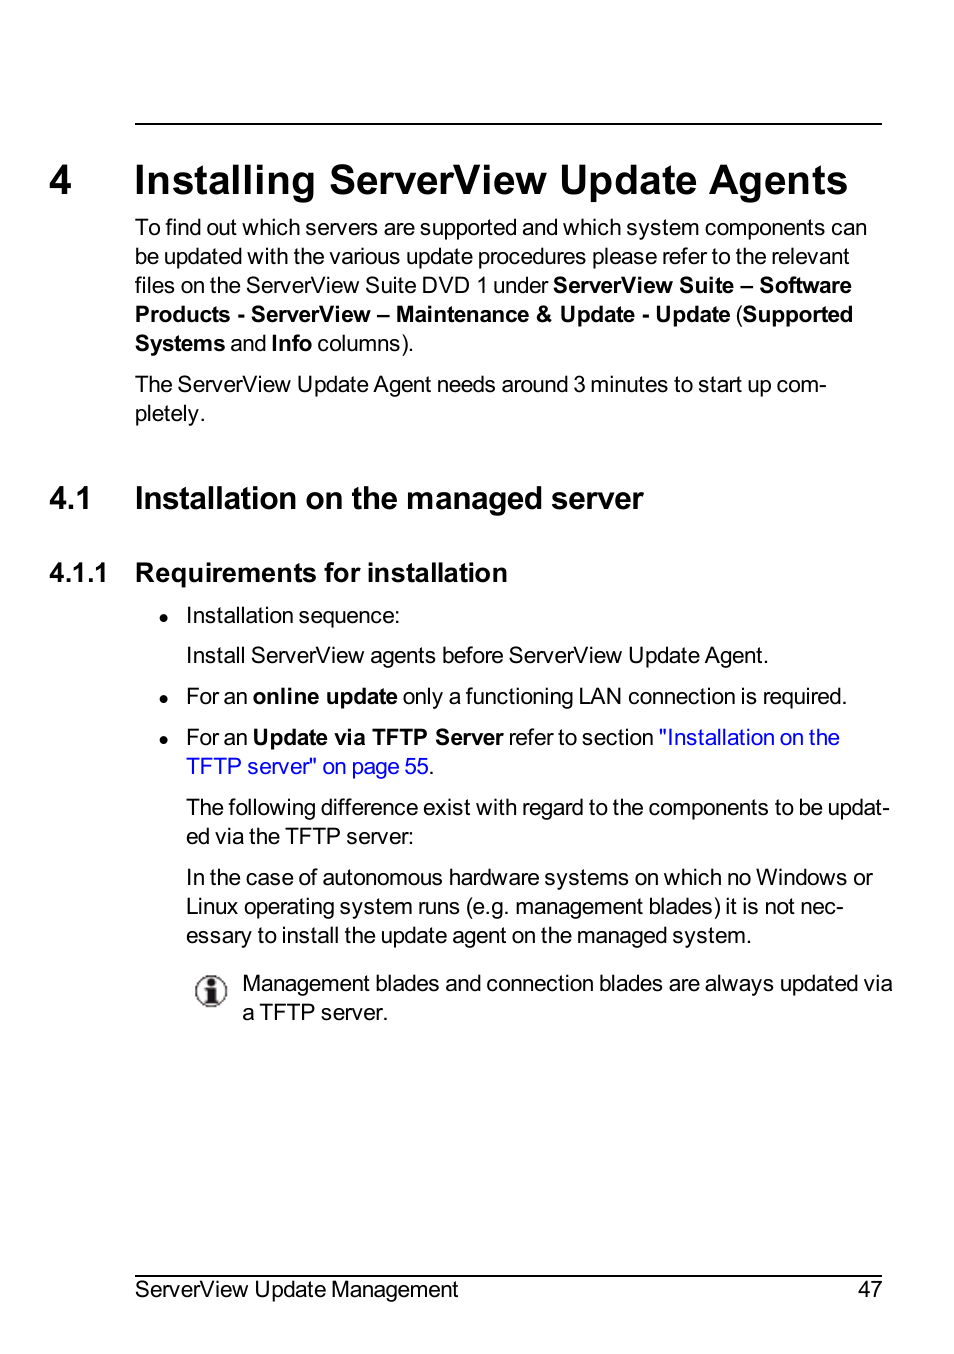 4 installing serverview update agents, 1 installation on the managed  server, 1 requirements for installation | FUJITSU ServerView Suite V6.10  User Manual | Page 47 / 296